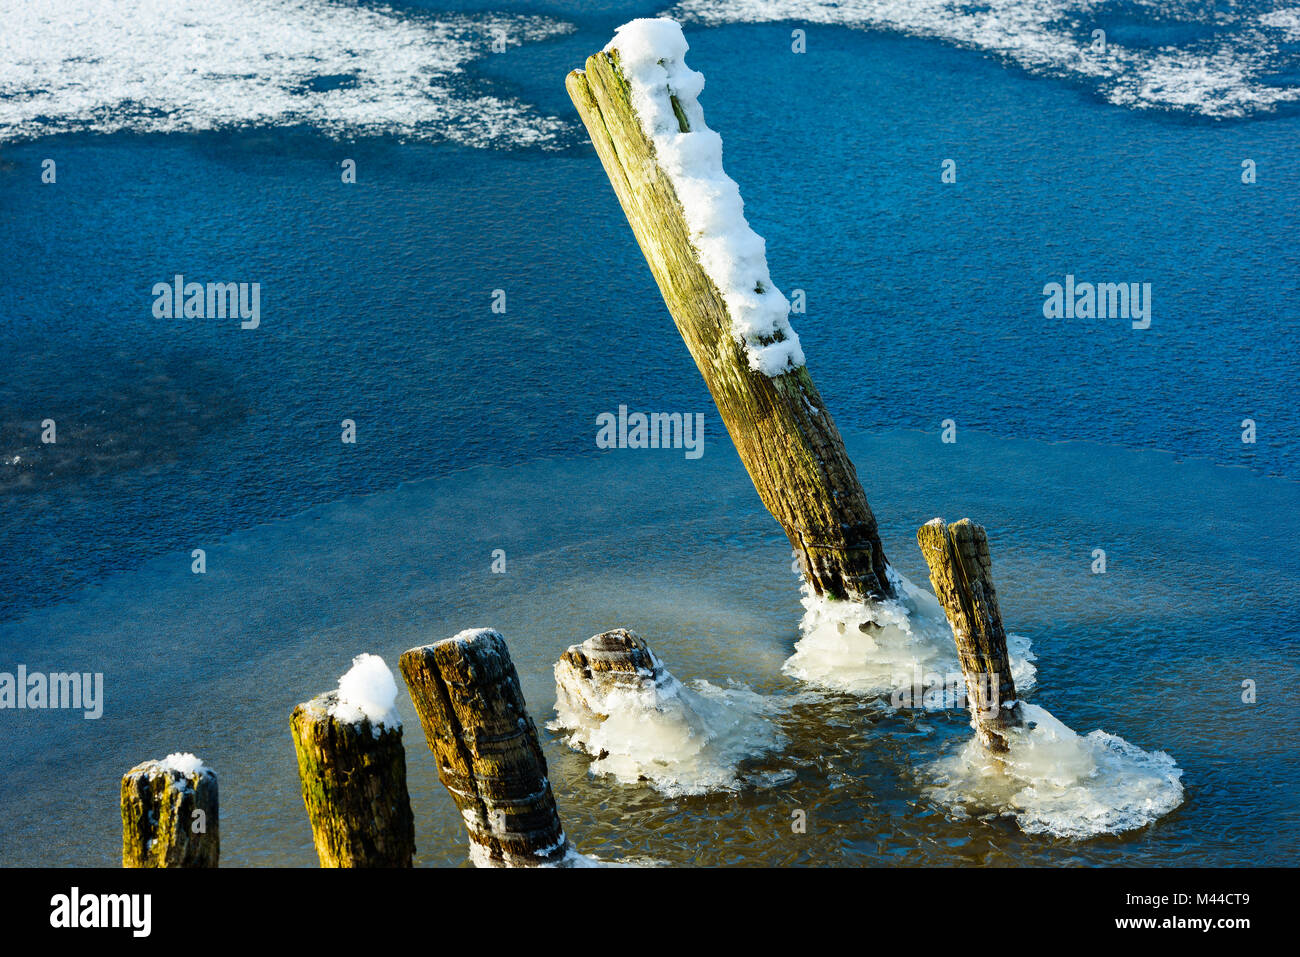 Pier remnants in frozen water. Gnarled and weathered wooden poles with ice and snow. Stock Photo